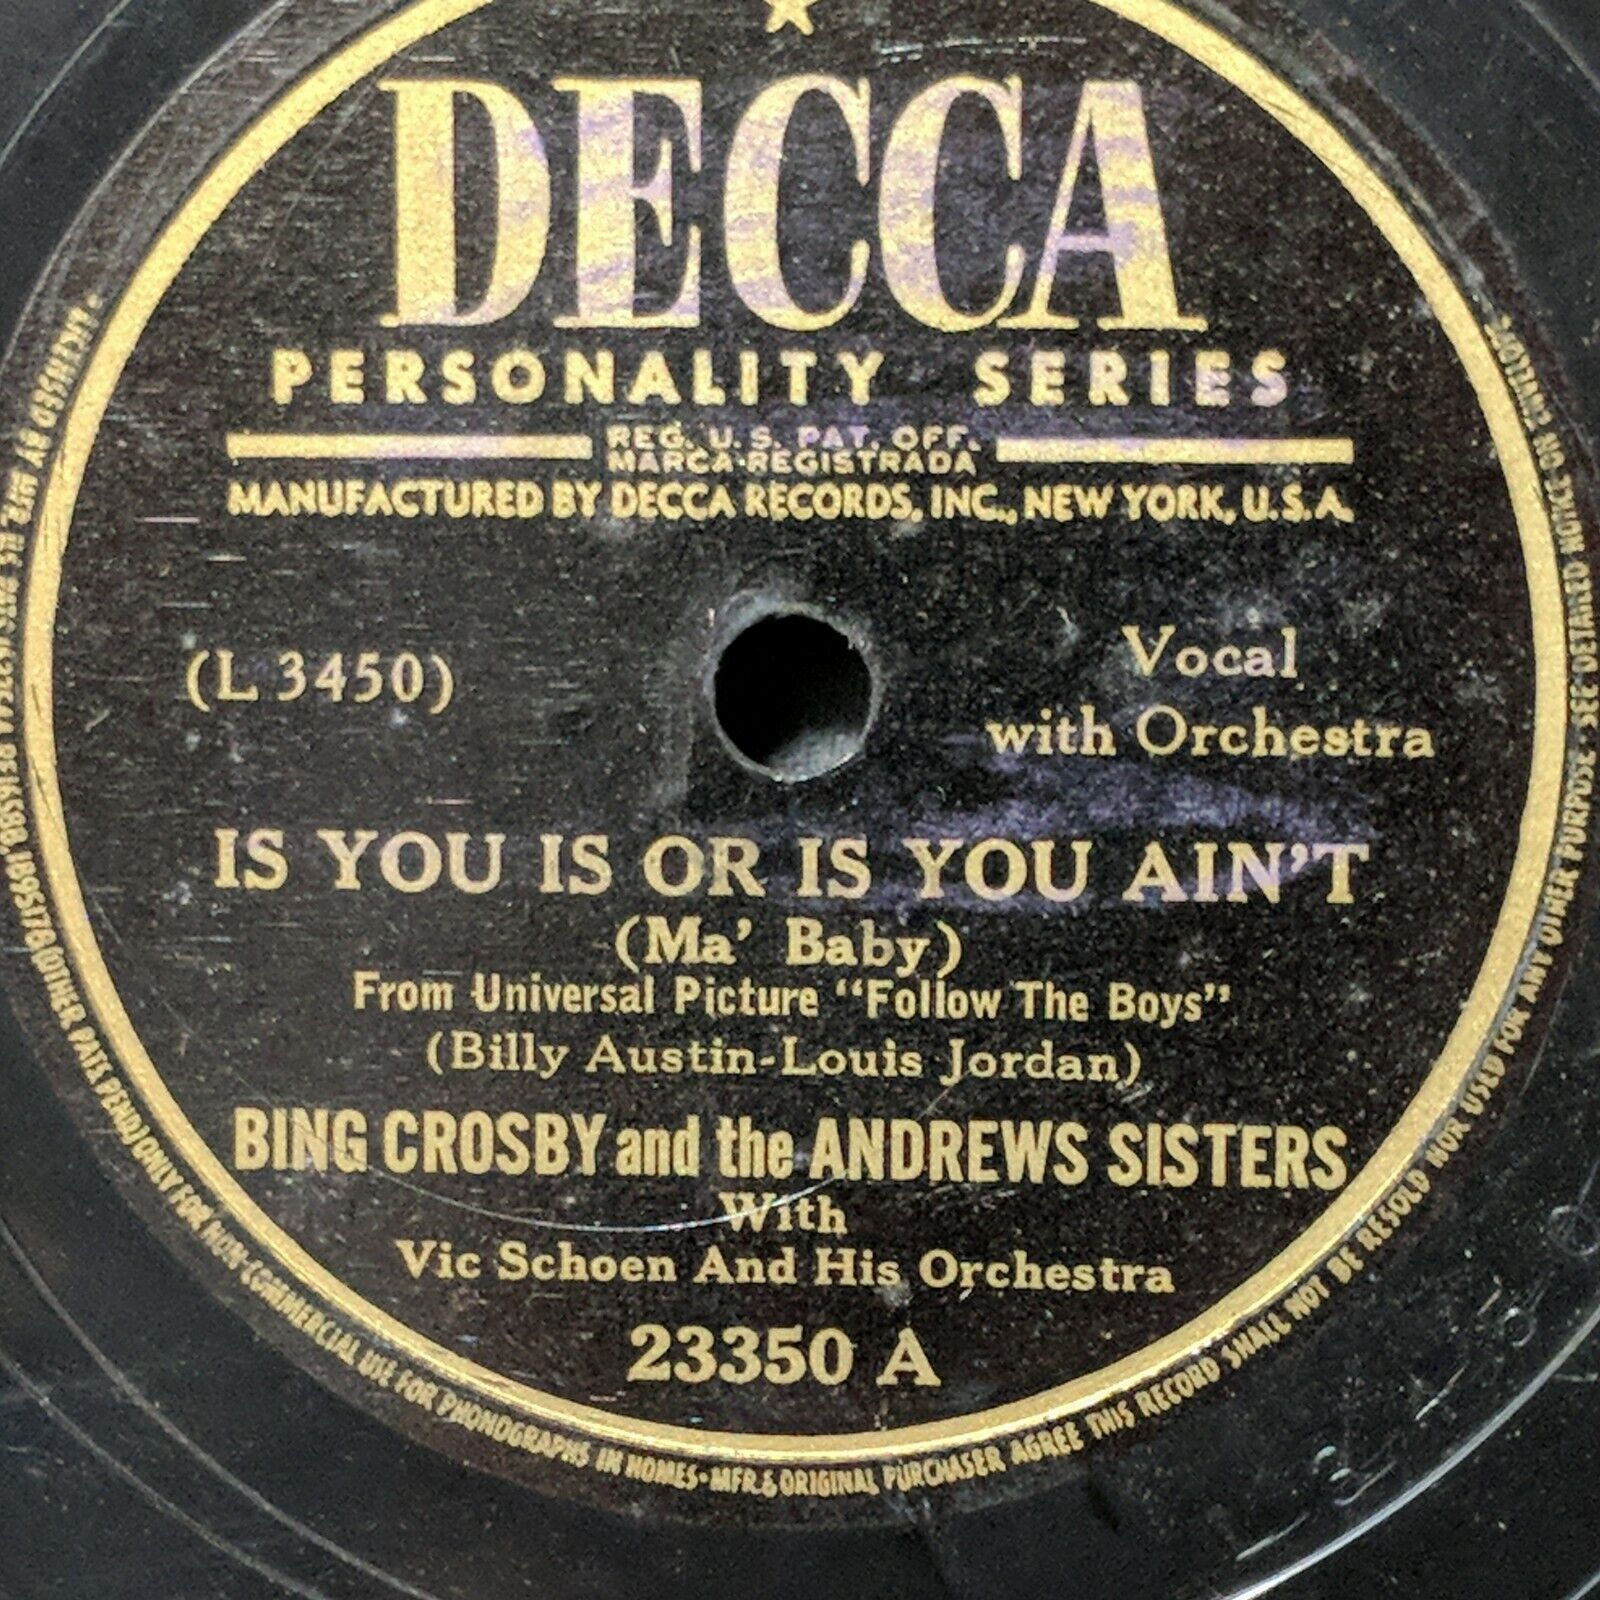 Bing Crosby And The Andrews Sisters - if you is or is you ain't Decca 10" 